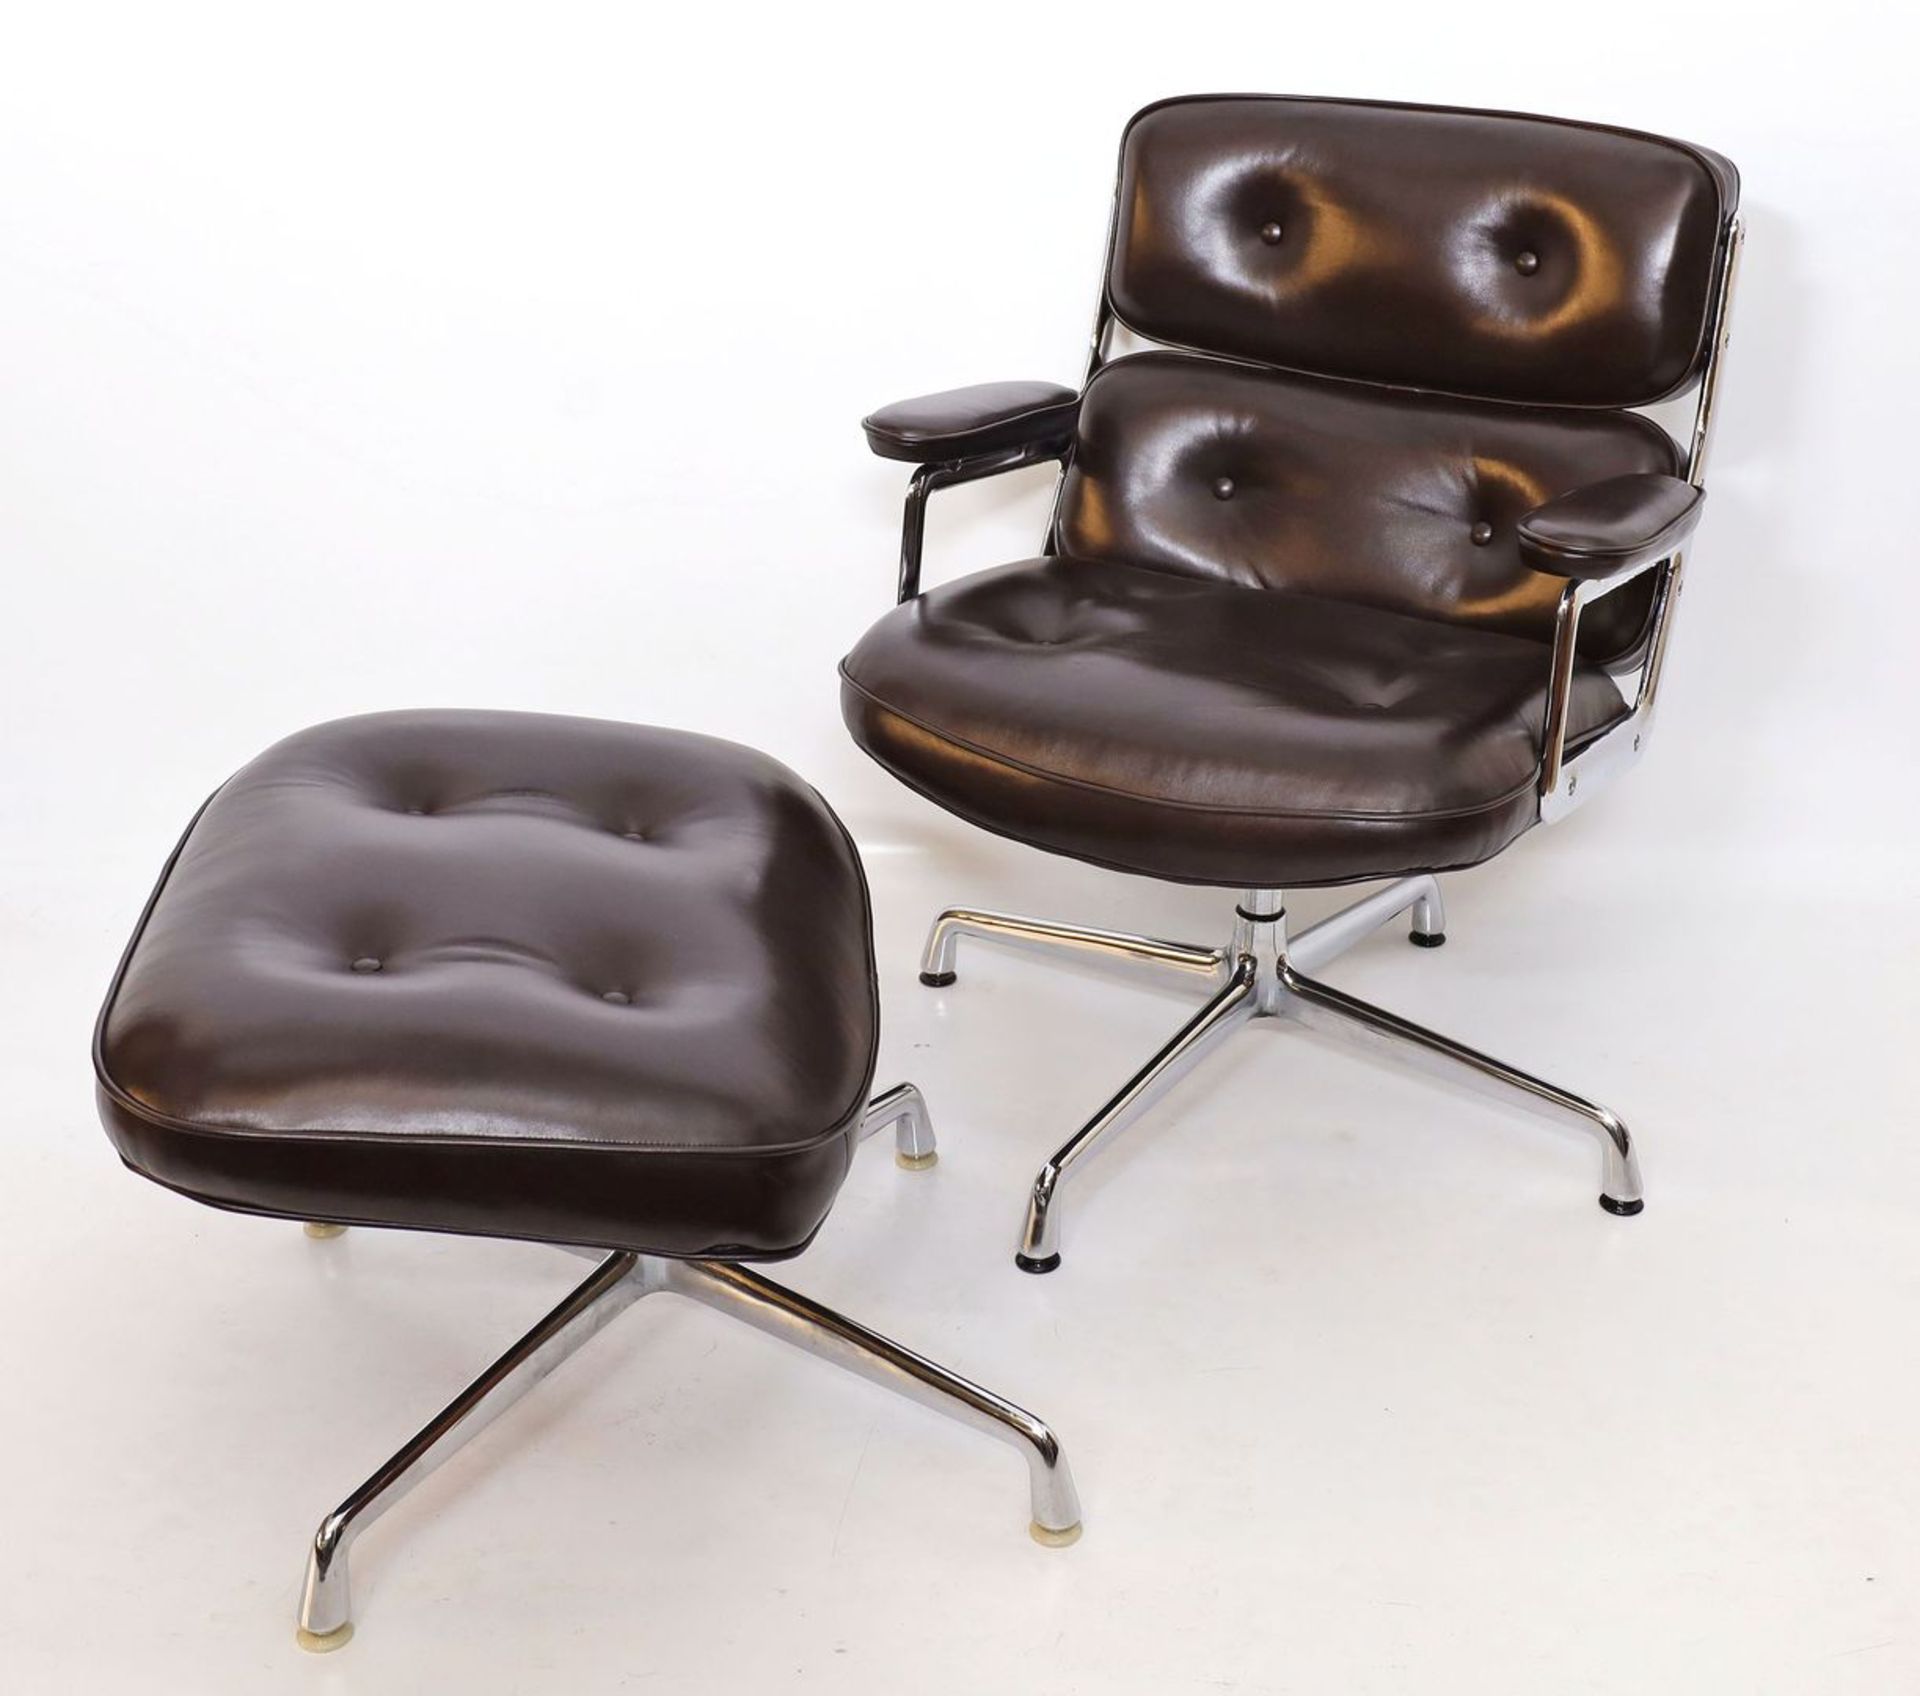 Eames, Ray und Charles - Image 2 of 2